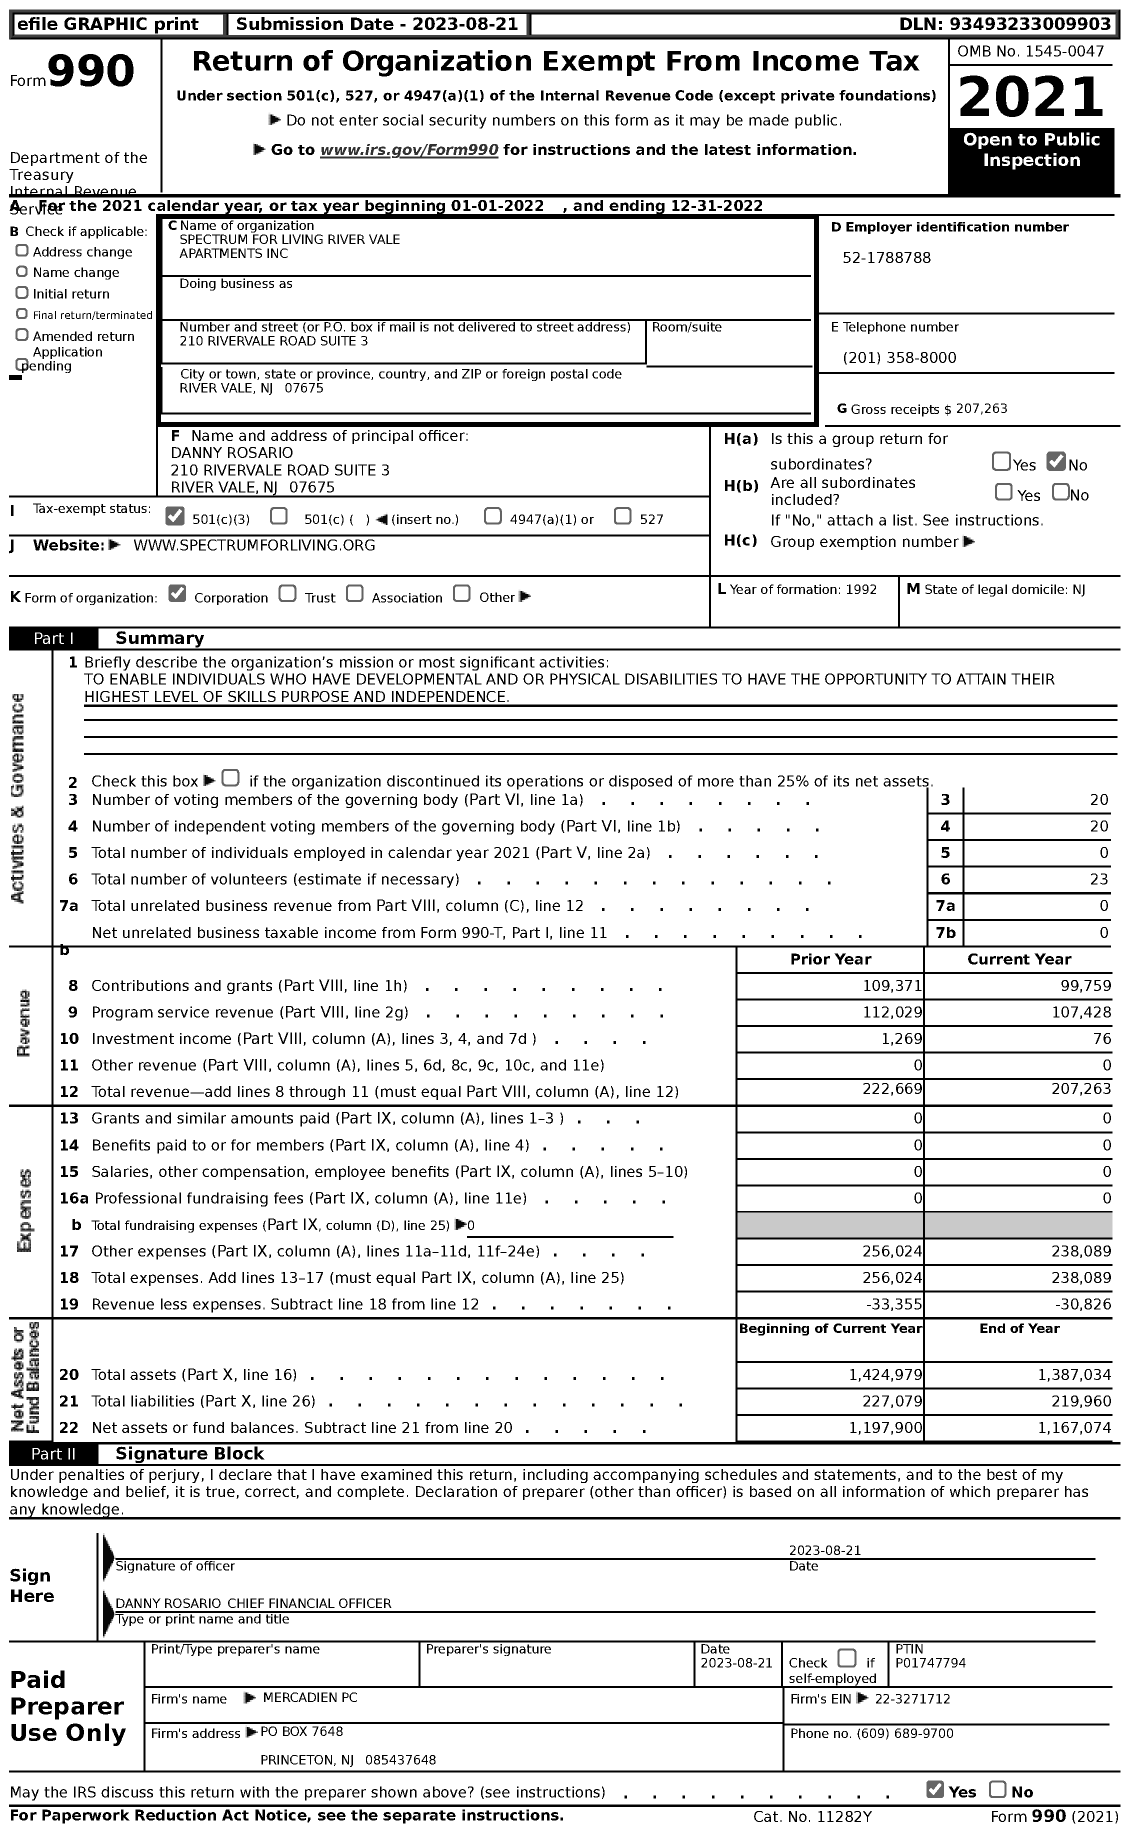 Image of first page of 2022 Form 990 for Spectrum for Living River Vale Apartments